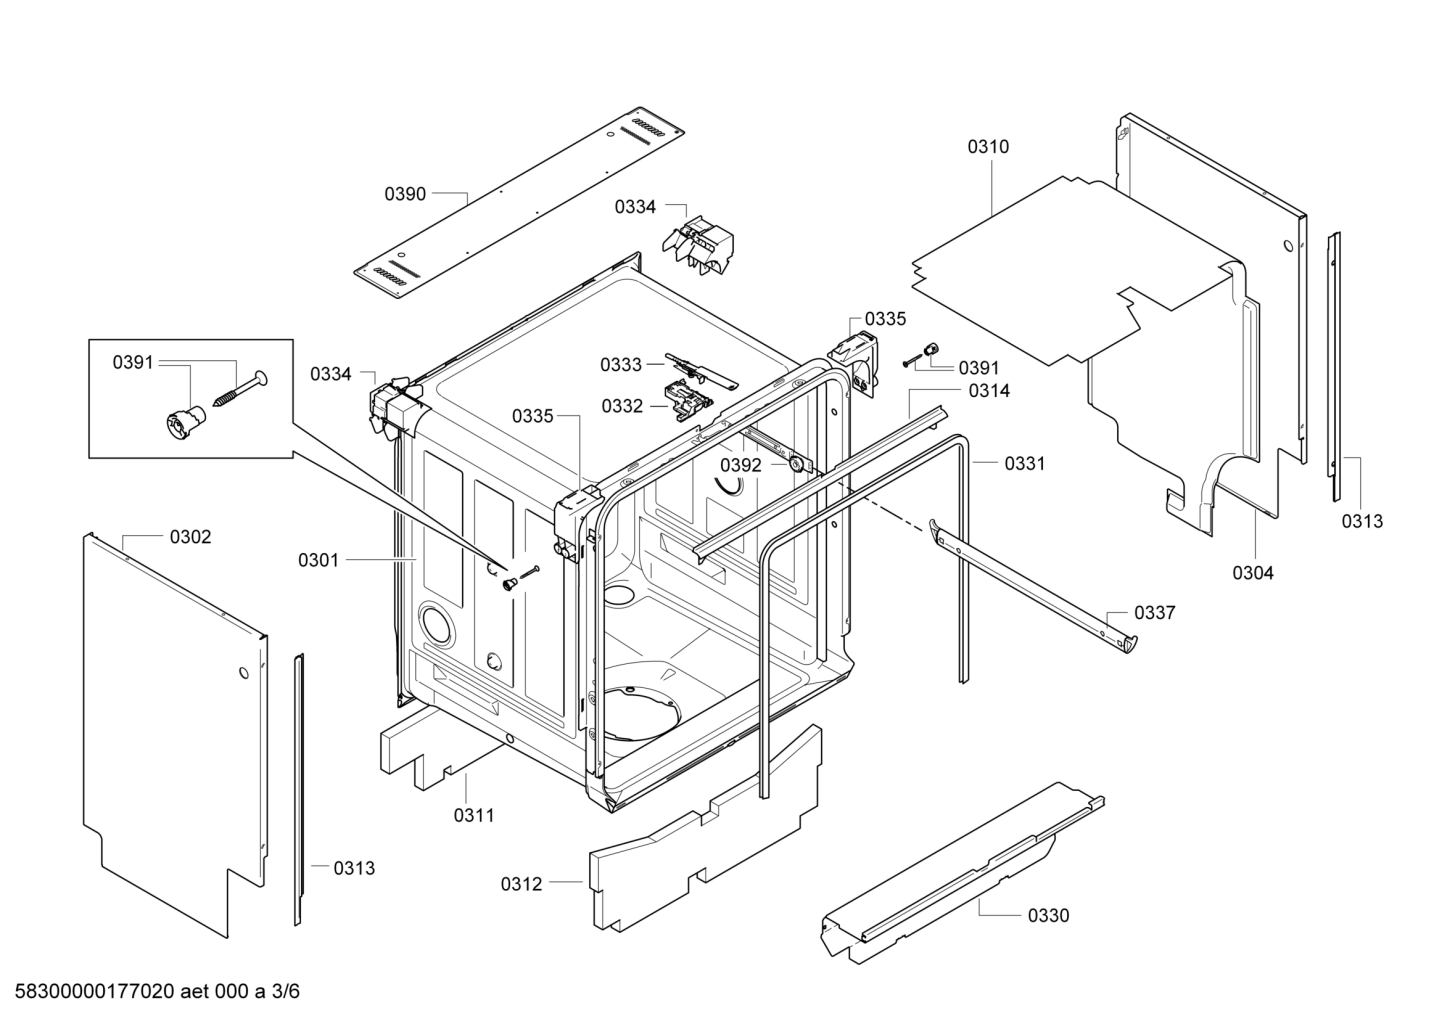 drawing_link_3_device_1636901